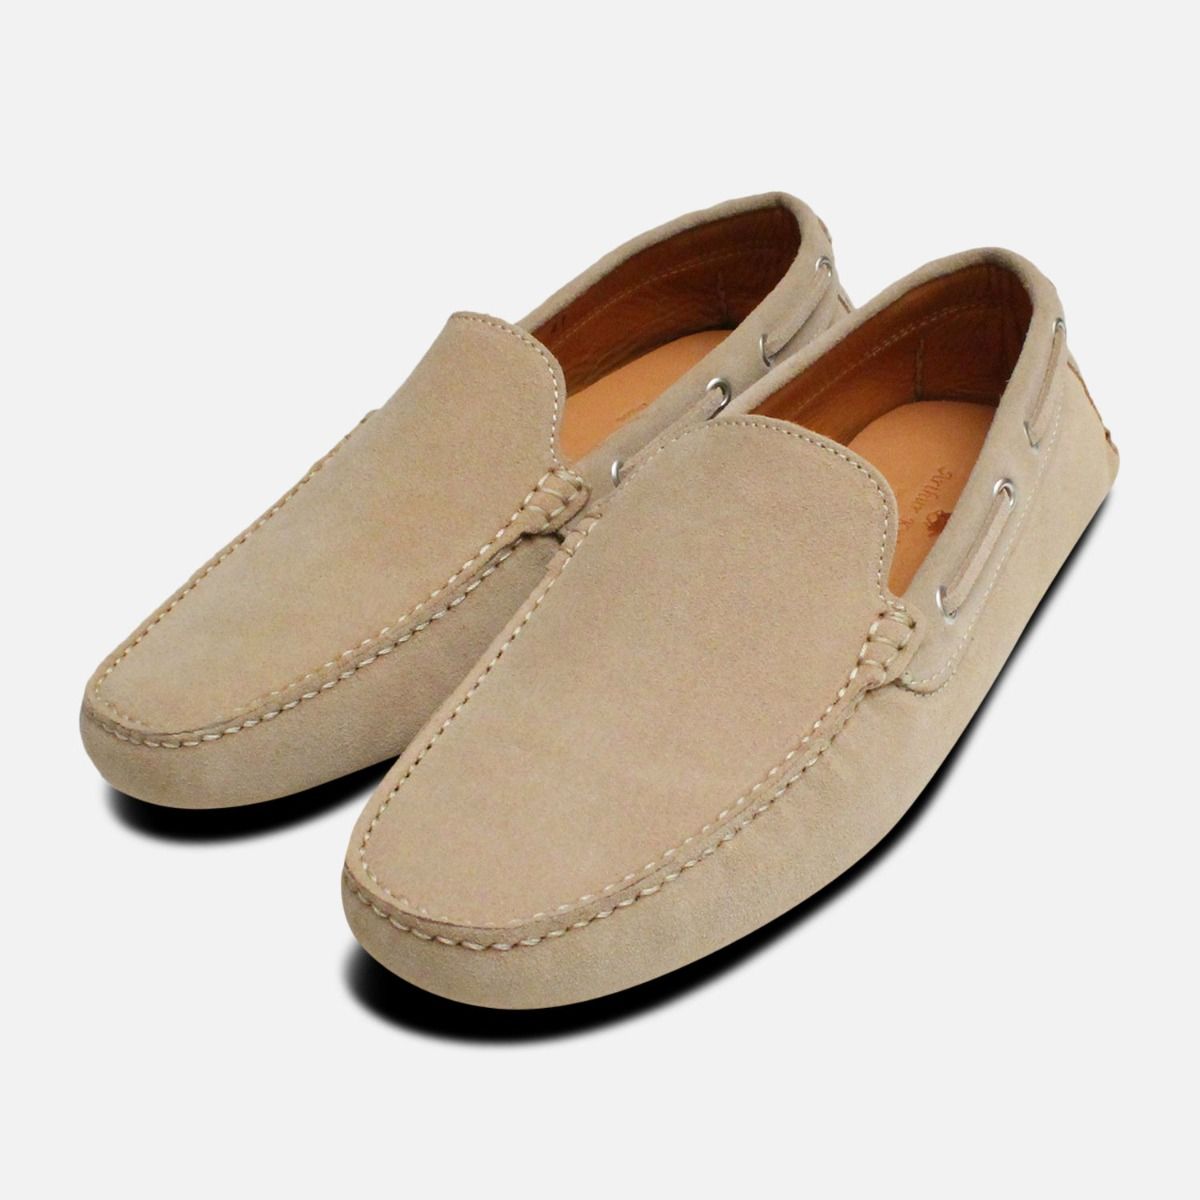 suede driving loafers cheap online